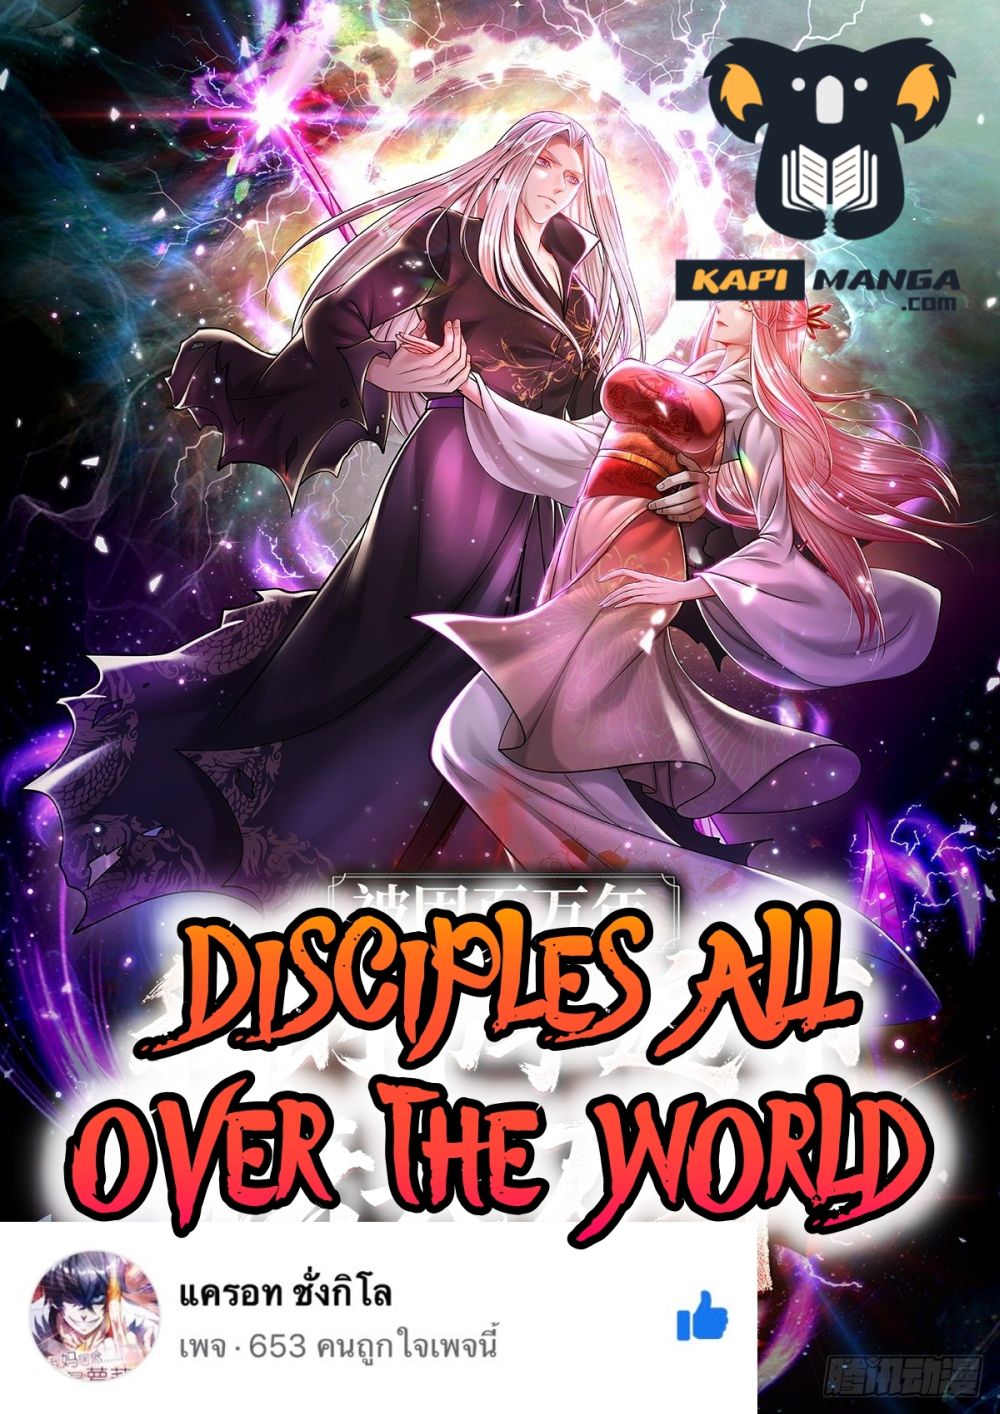 Disciples All Over the World à¸à¸­à¸à¸à¸µà¹ 39 (1)